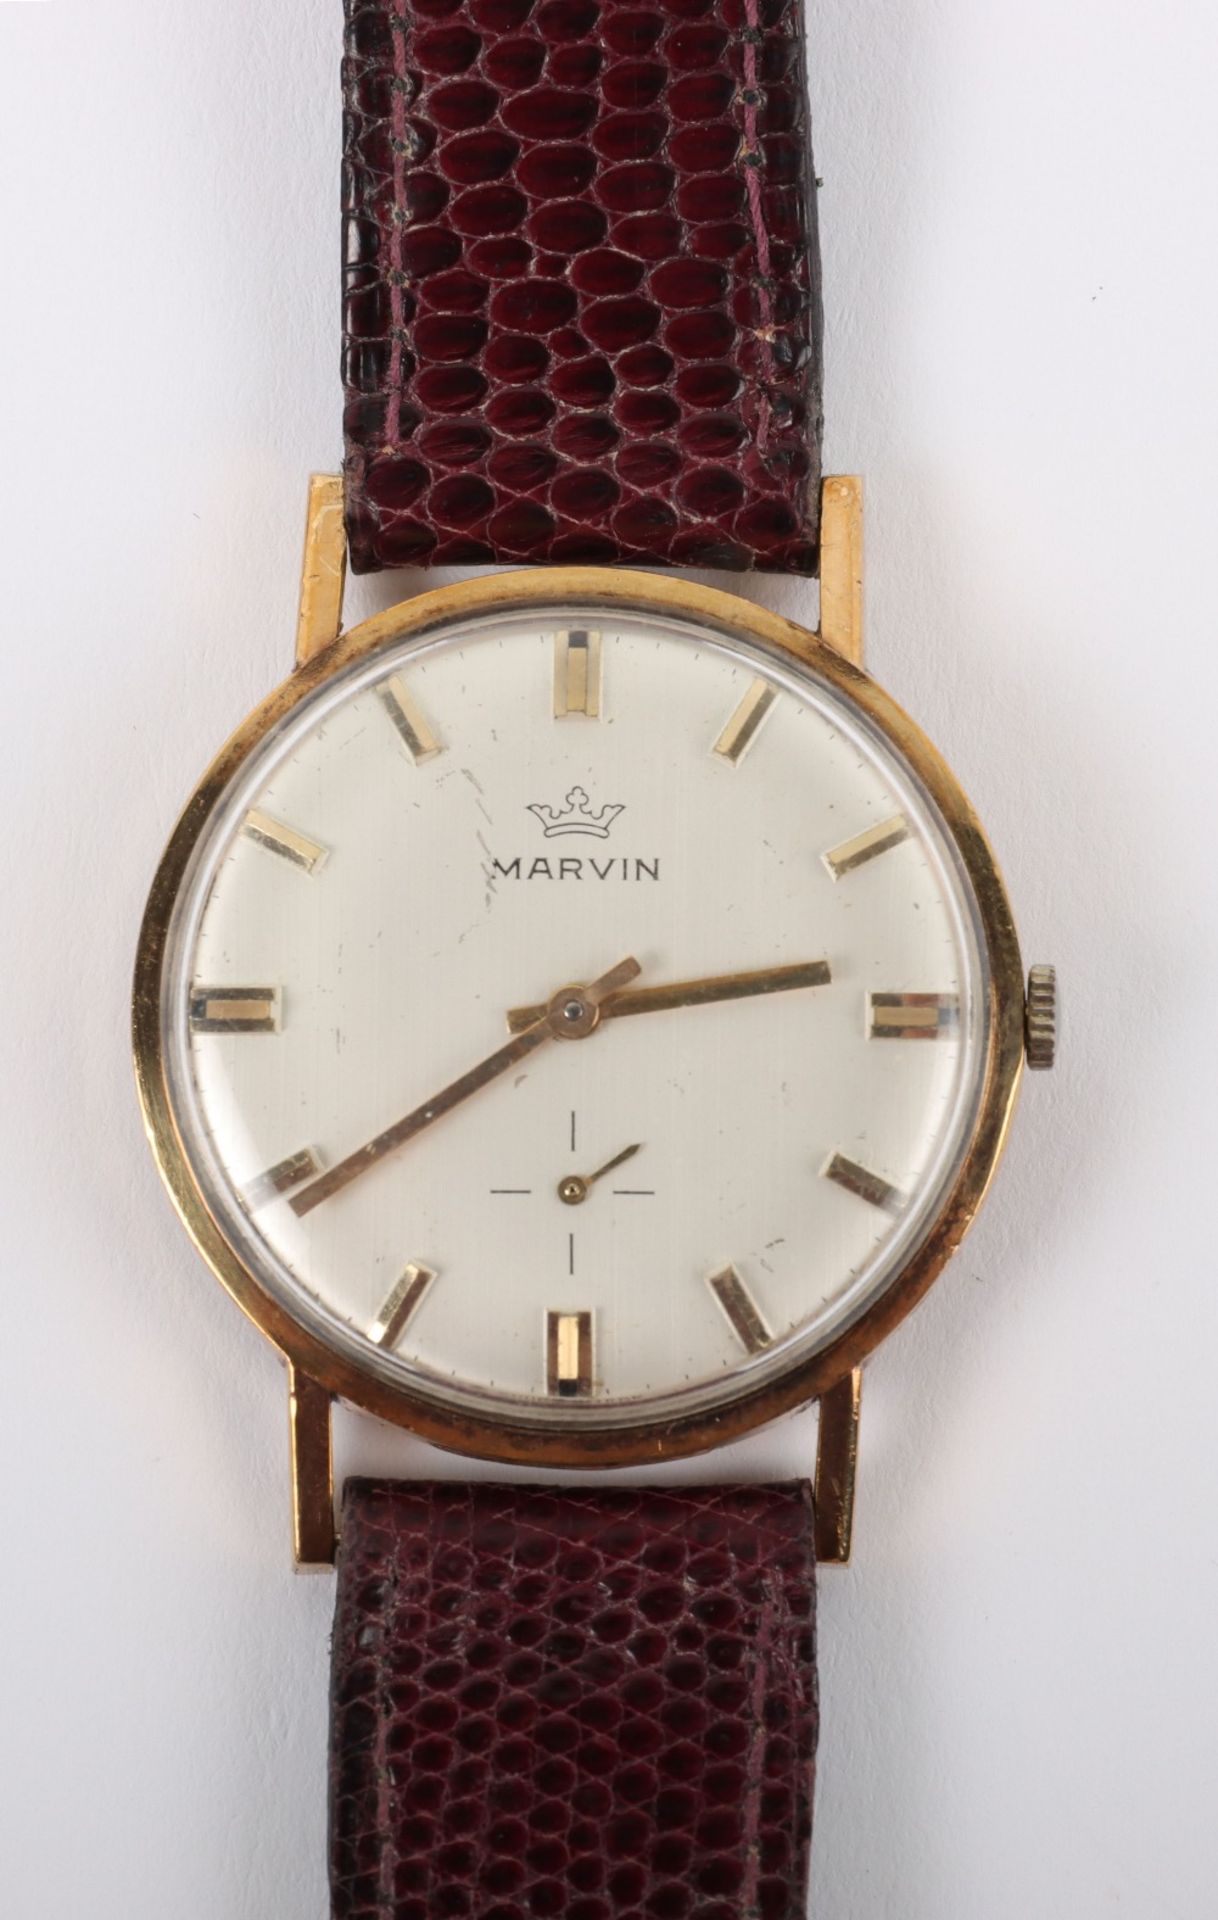 A vintage 9ct gold Marvin wristwatch, circa 1950 - Image 2 of 4